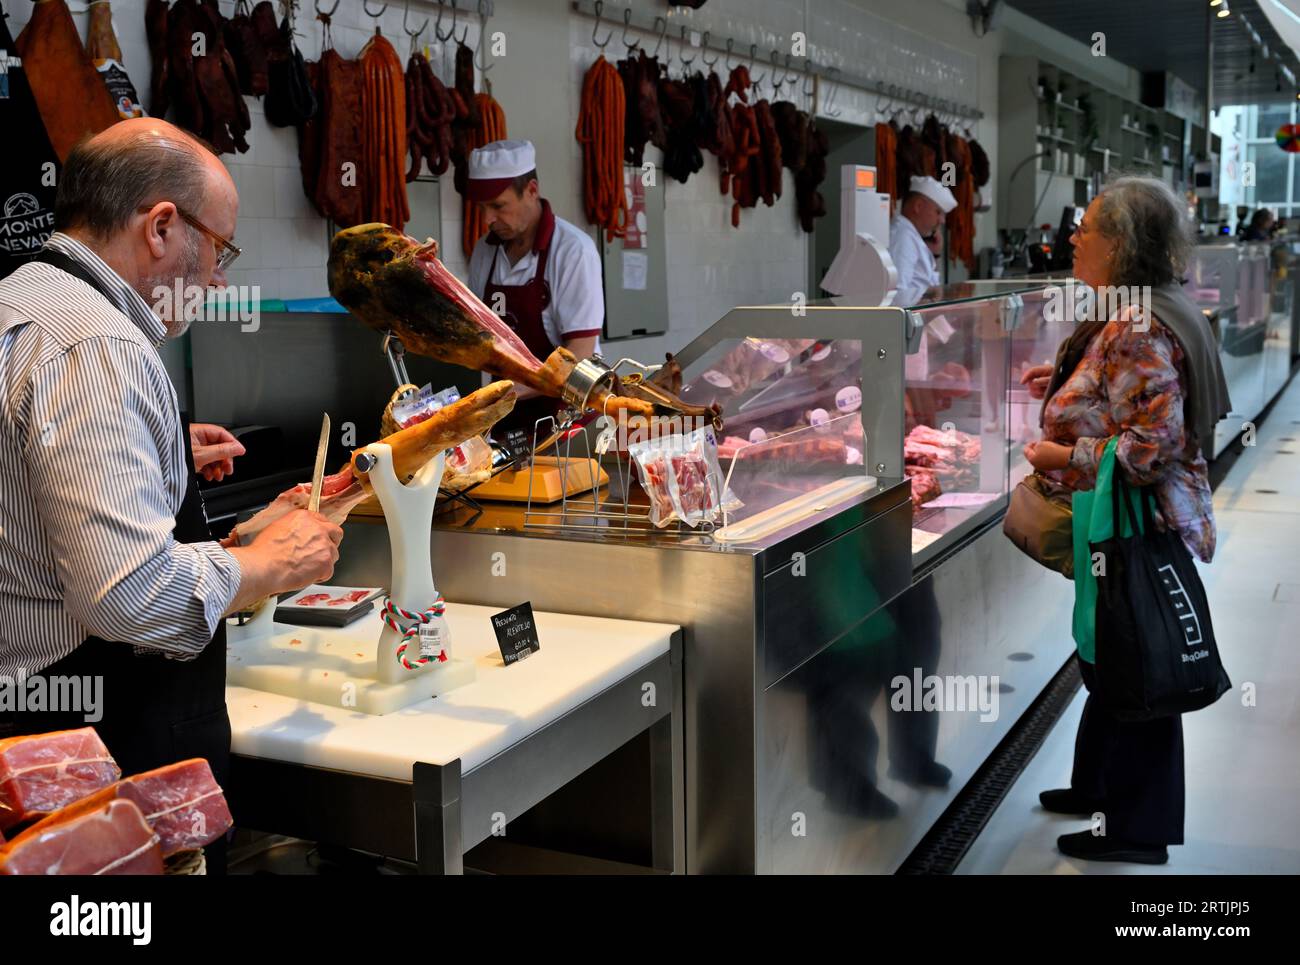 Butchers stall in covered market, Mercado do Bolhão, with ham hock being carved Stock Photo